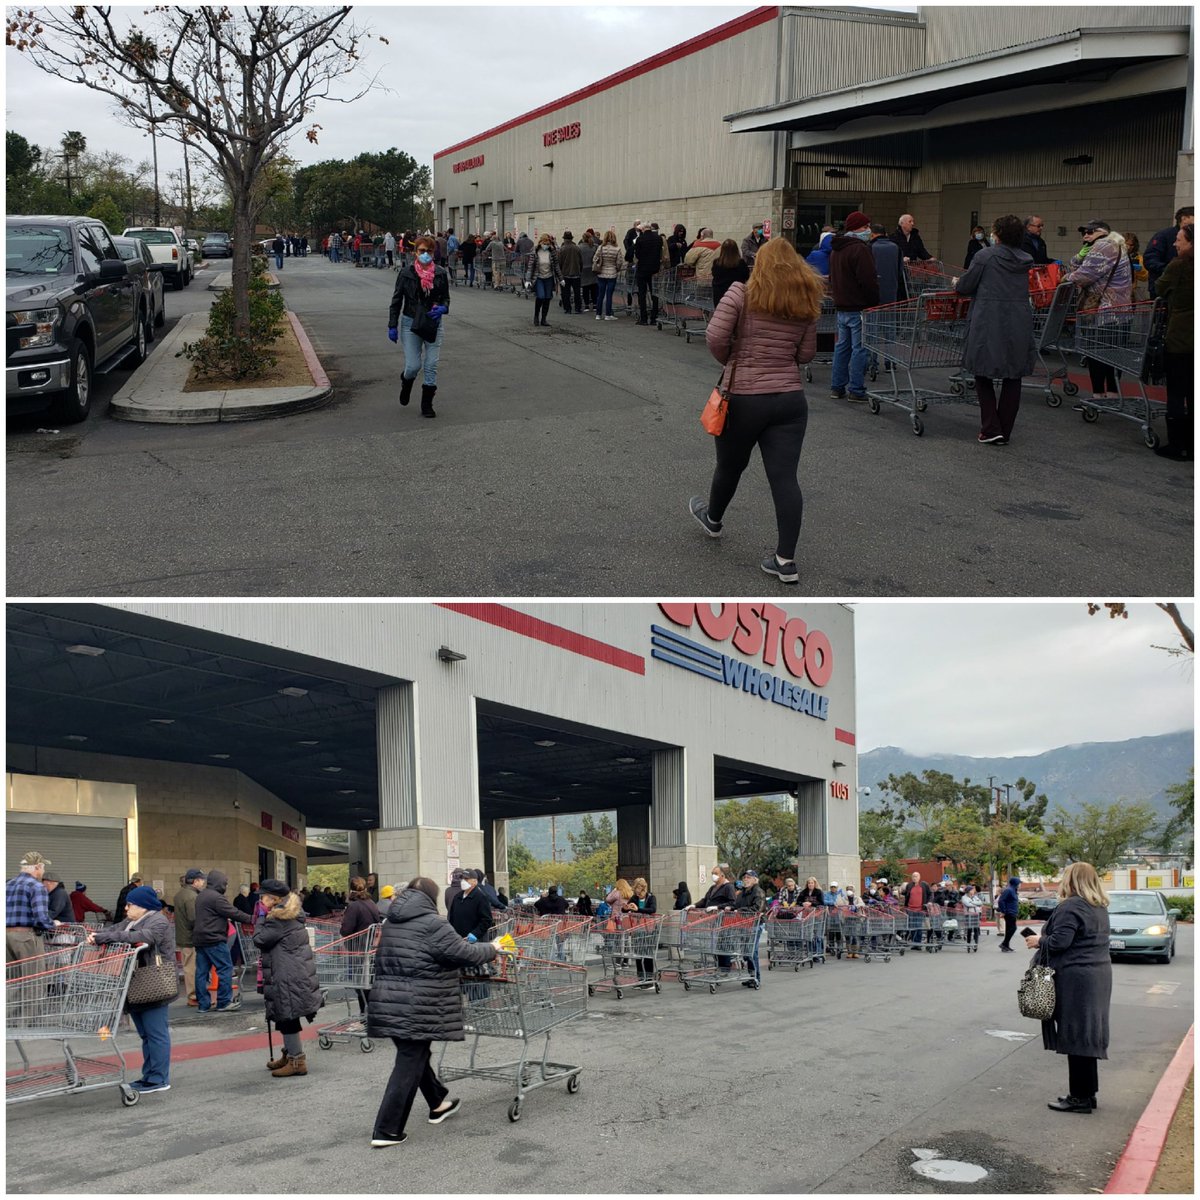 patrika darbo on twitter 8 am senior time at burbank costco the line down then circled back up lots of seniors not 6 feet apart so we went home not really we